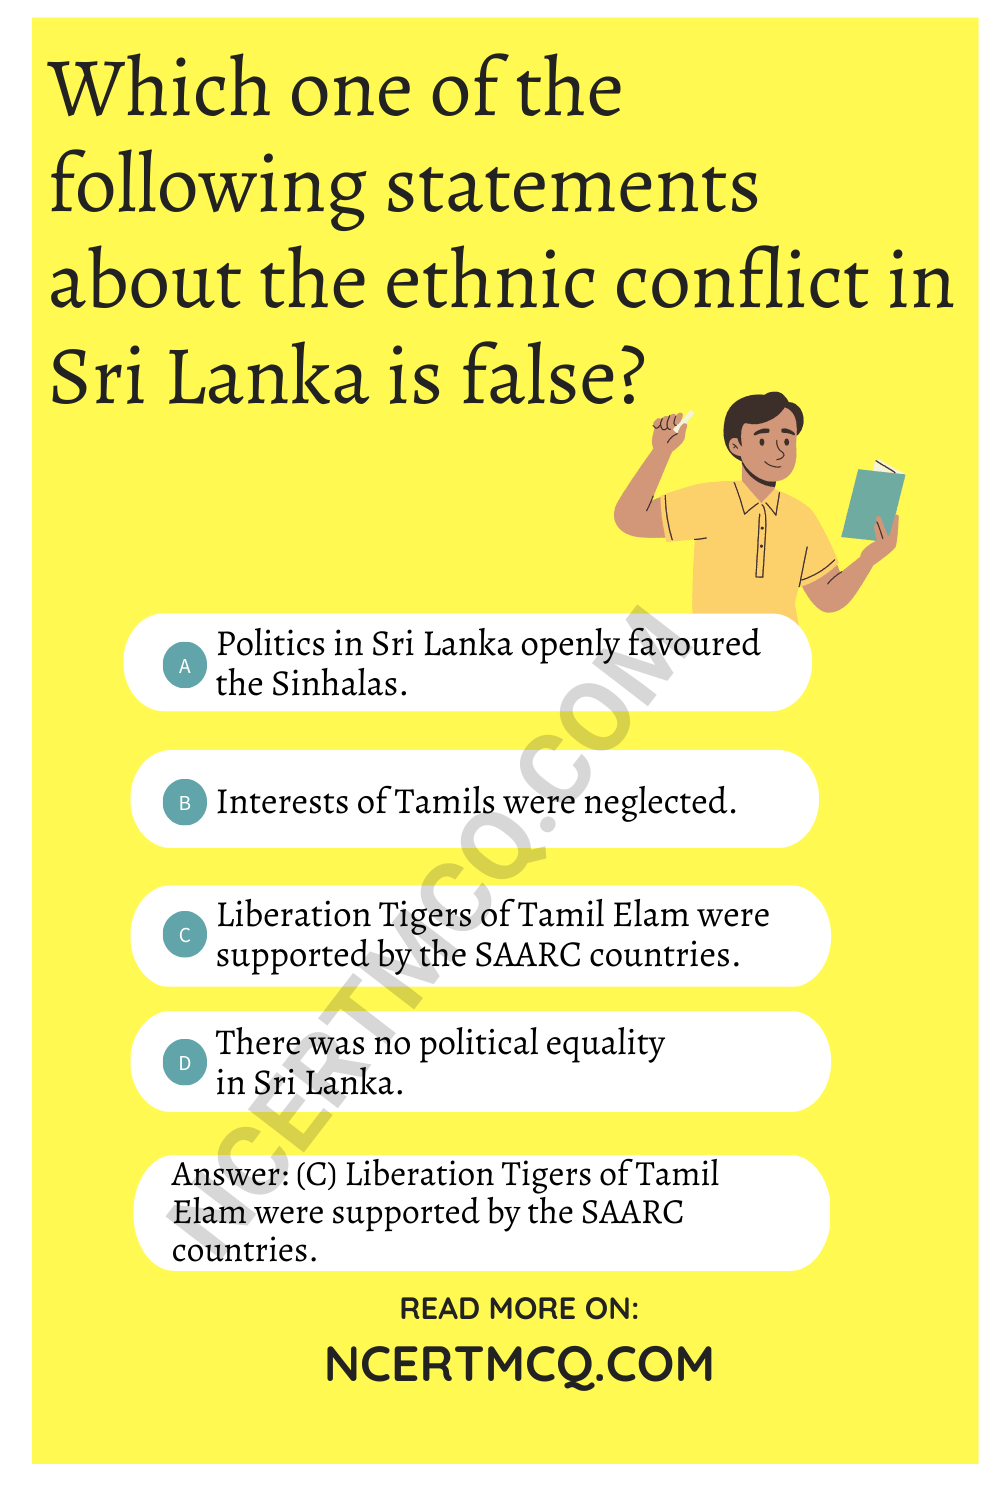 Which one of the following statements about the ethnic conflict in Sri Lanka is false?